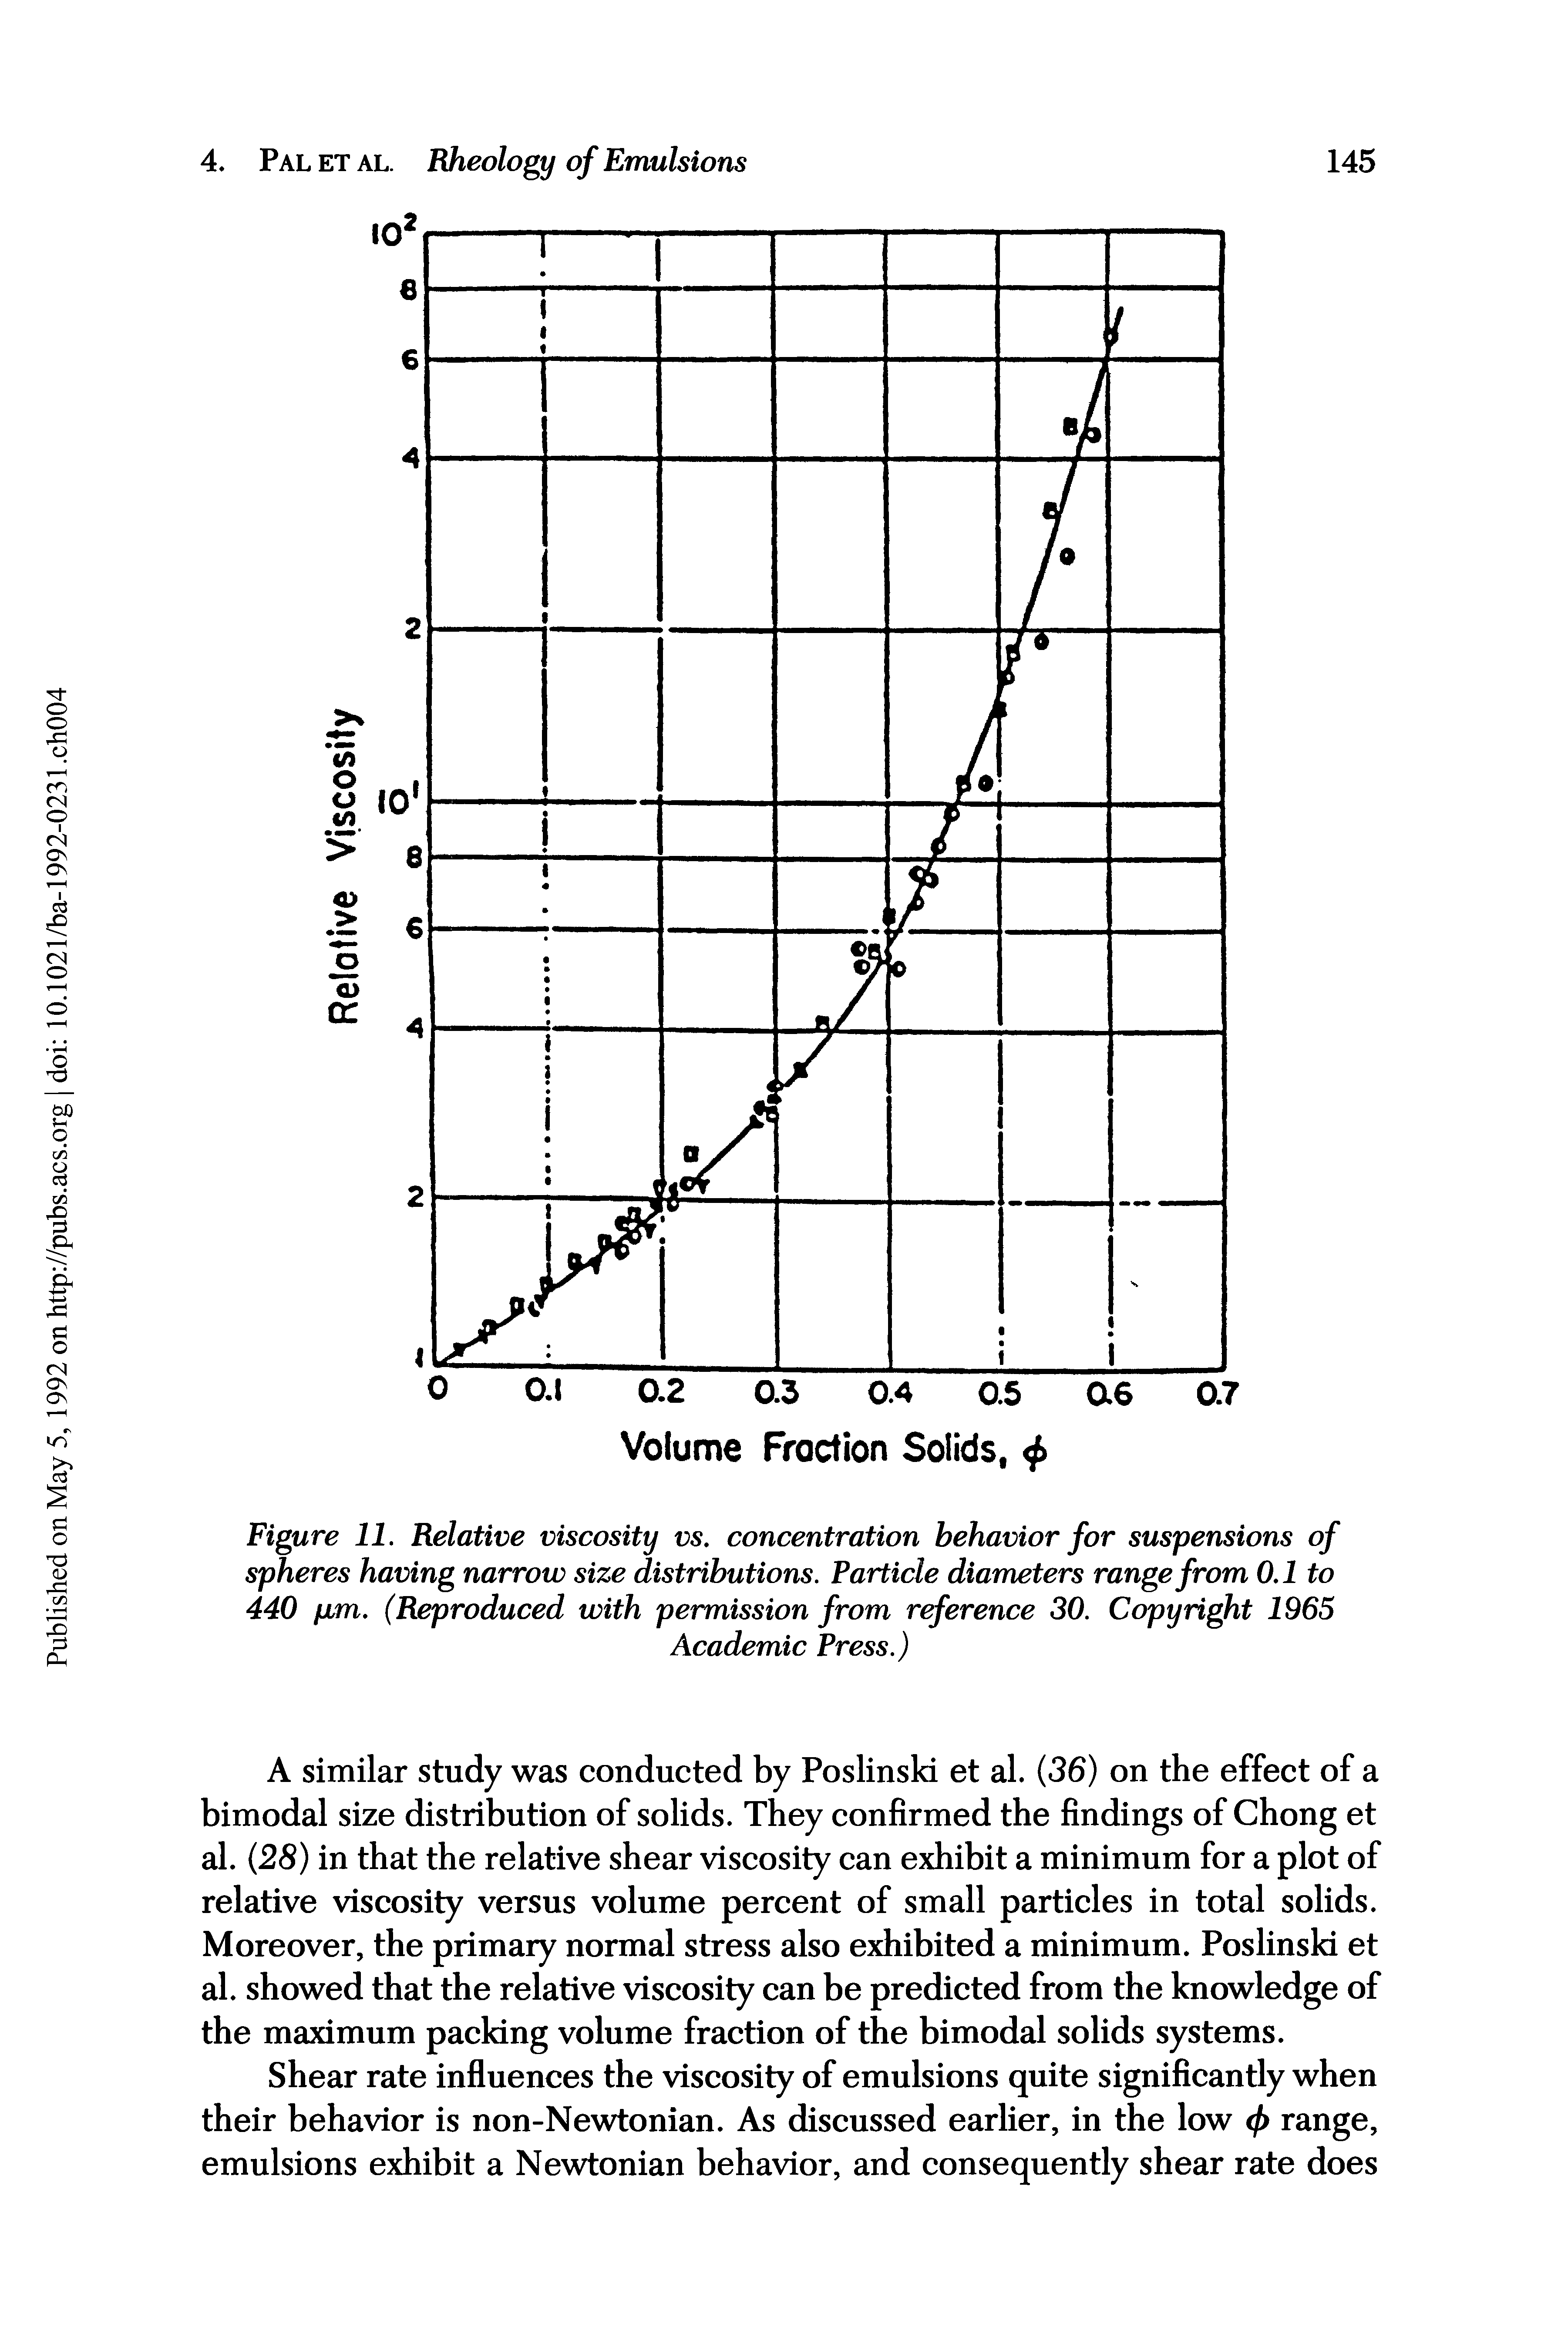 Figure 11. Relative viscosity vs. concentration behavior for suspensions of spheres having narrow size distributions. Particle diameters range from 0.1 to 440 pm. (Reproduced with permission from reference 30. Copyright 1965...